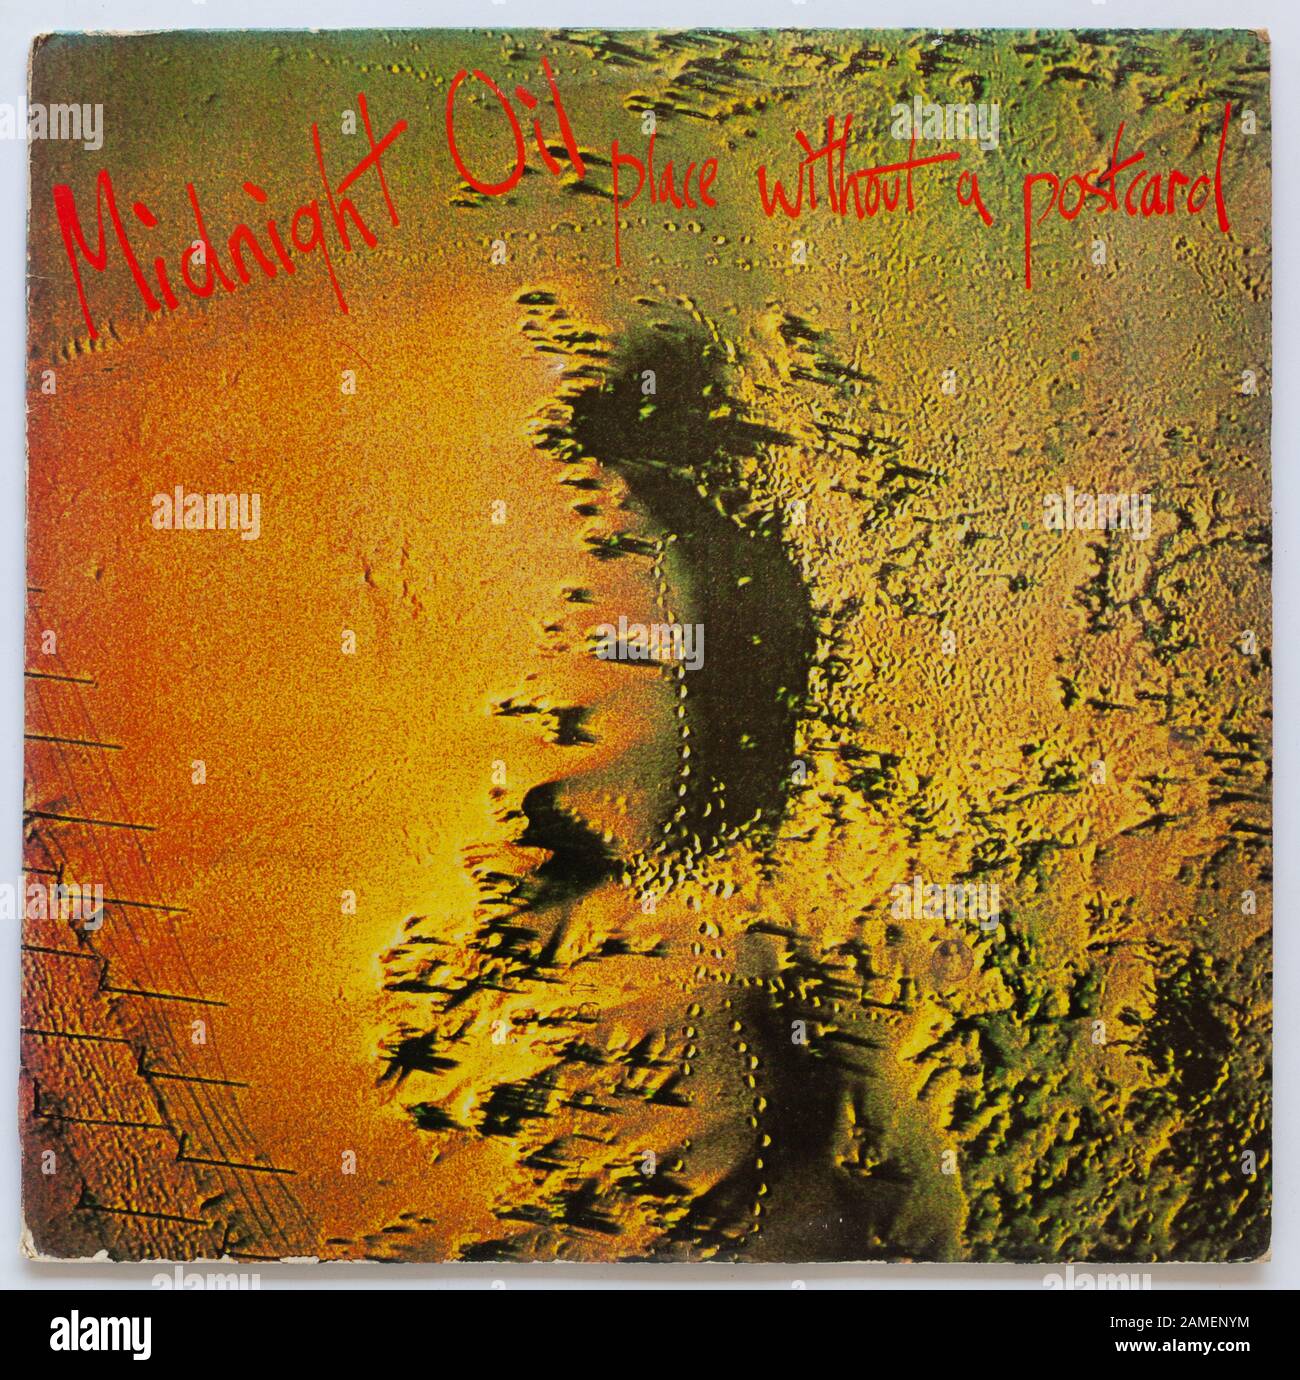 The cover of Place Without A Postcard, 1981 album by Midnight Oil on CBS - Editorial use only Stock Photo